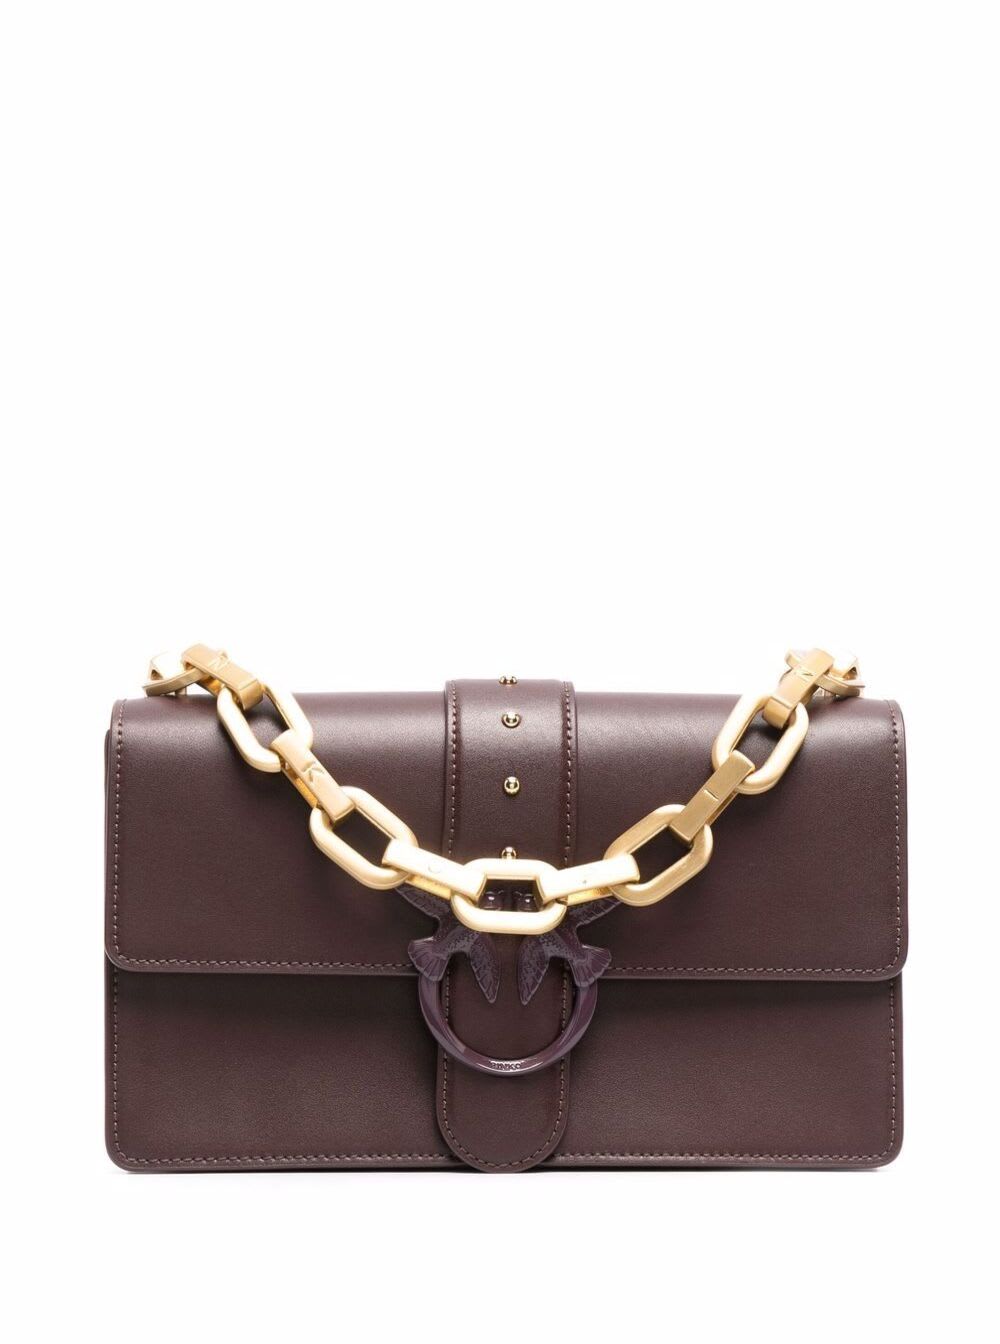 Pinko Love Classic Brown Leather Crossbody Bag With Logo